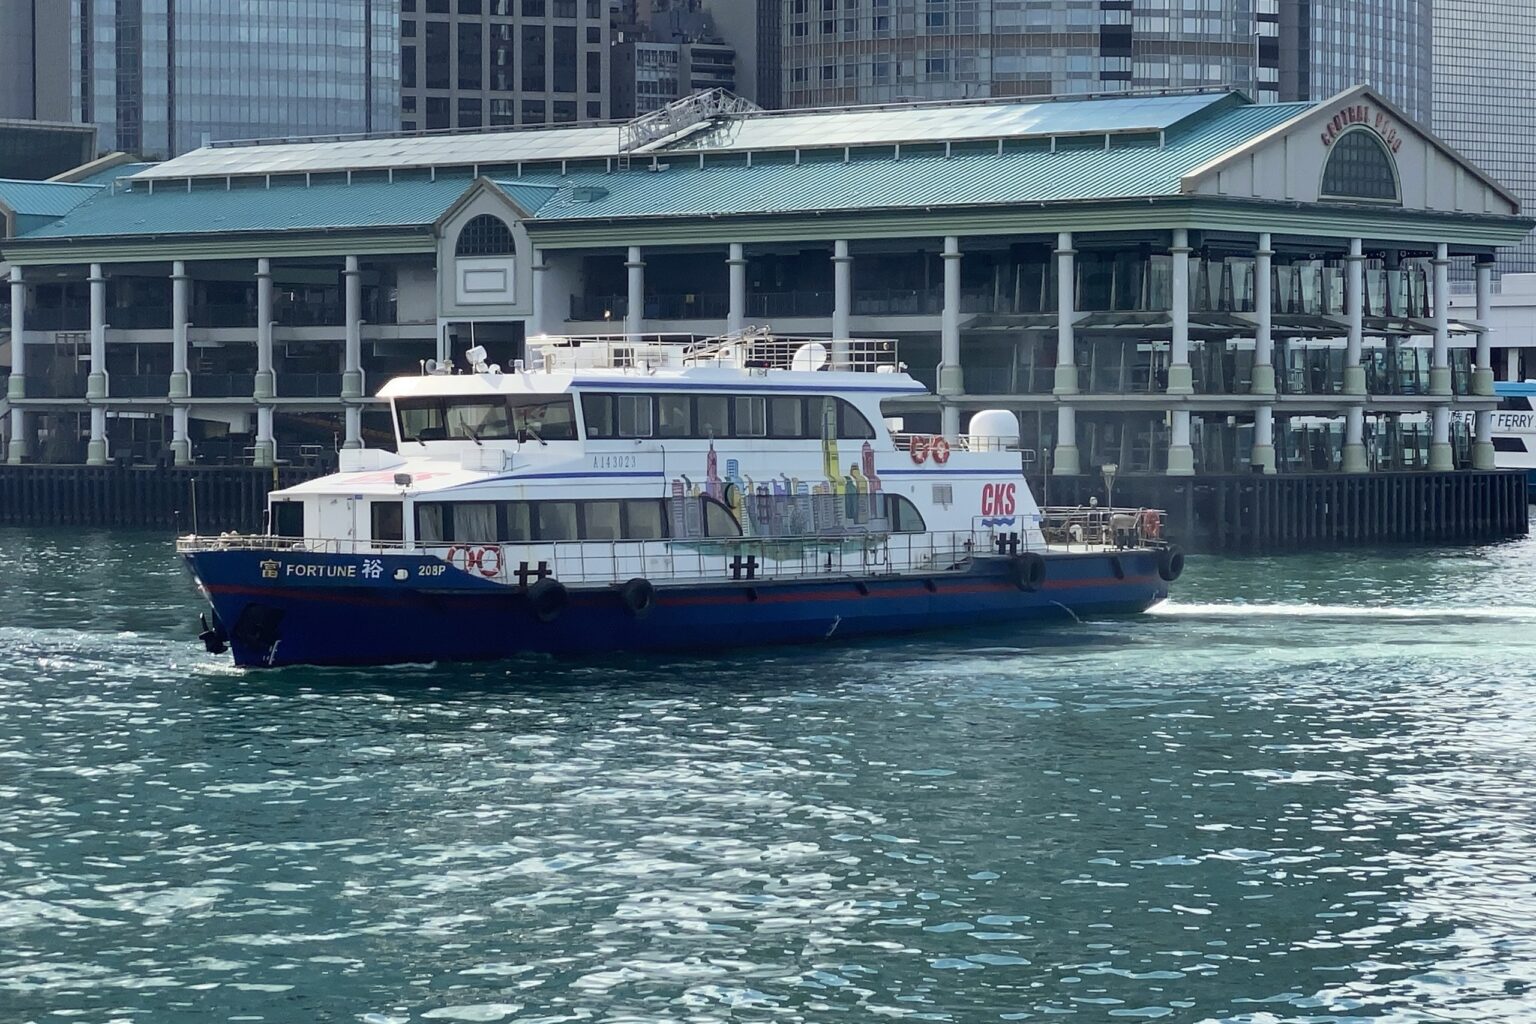 A Fortune Ferry bound for Hung Hom from the Central ferry pier in Hong Kong.